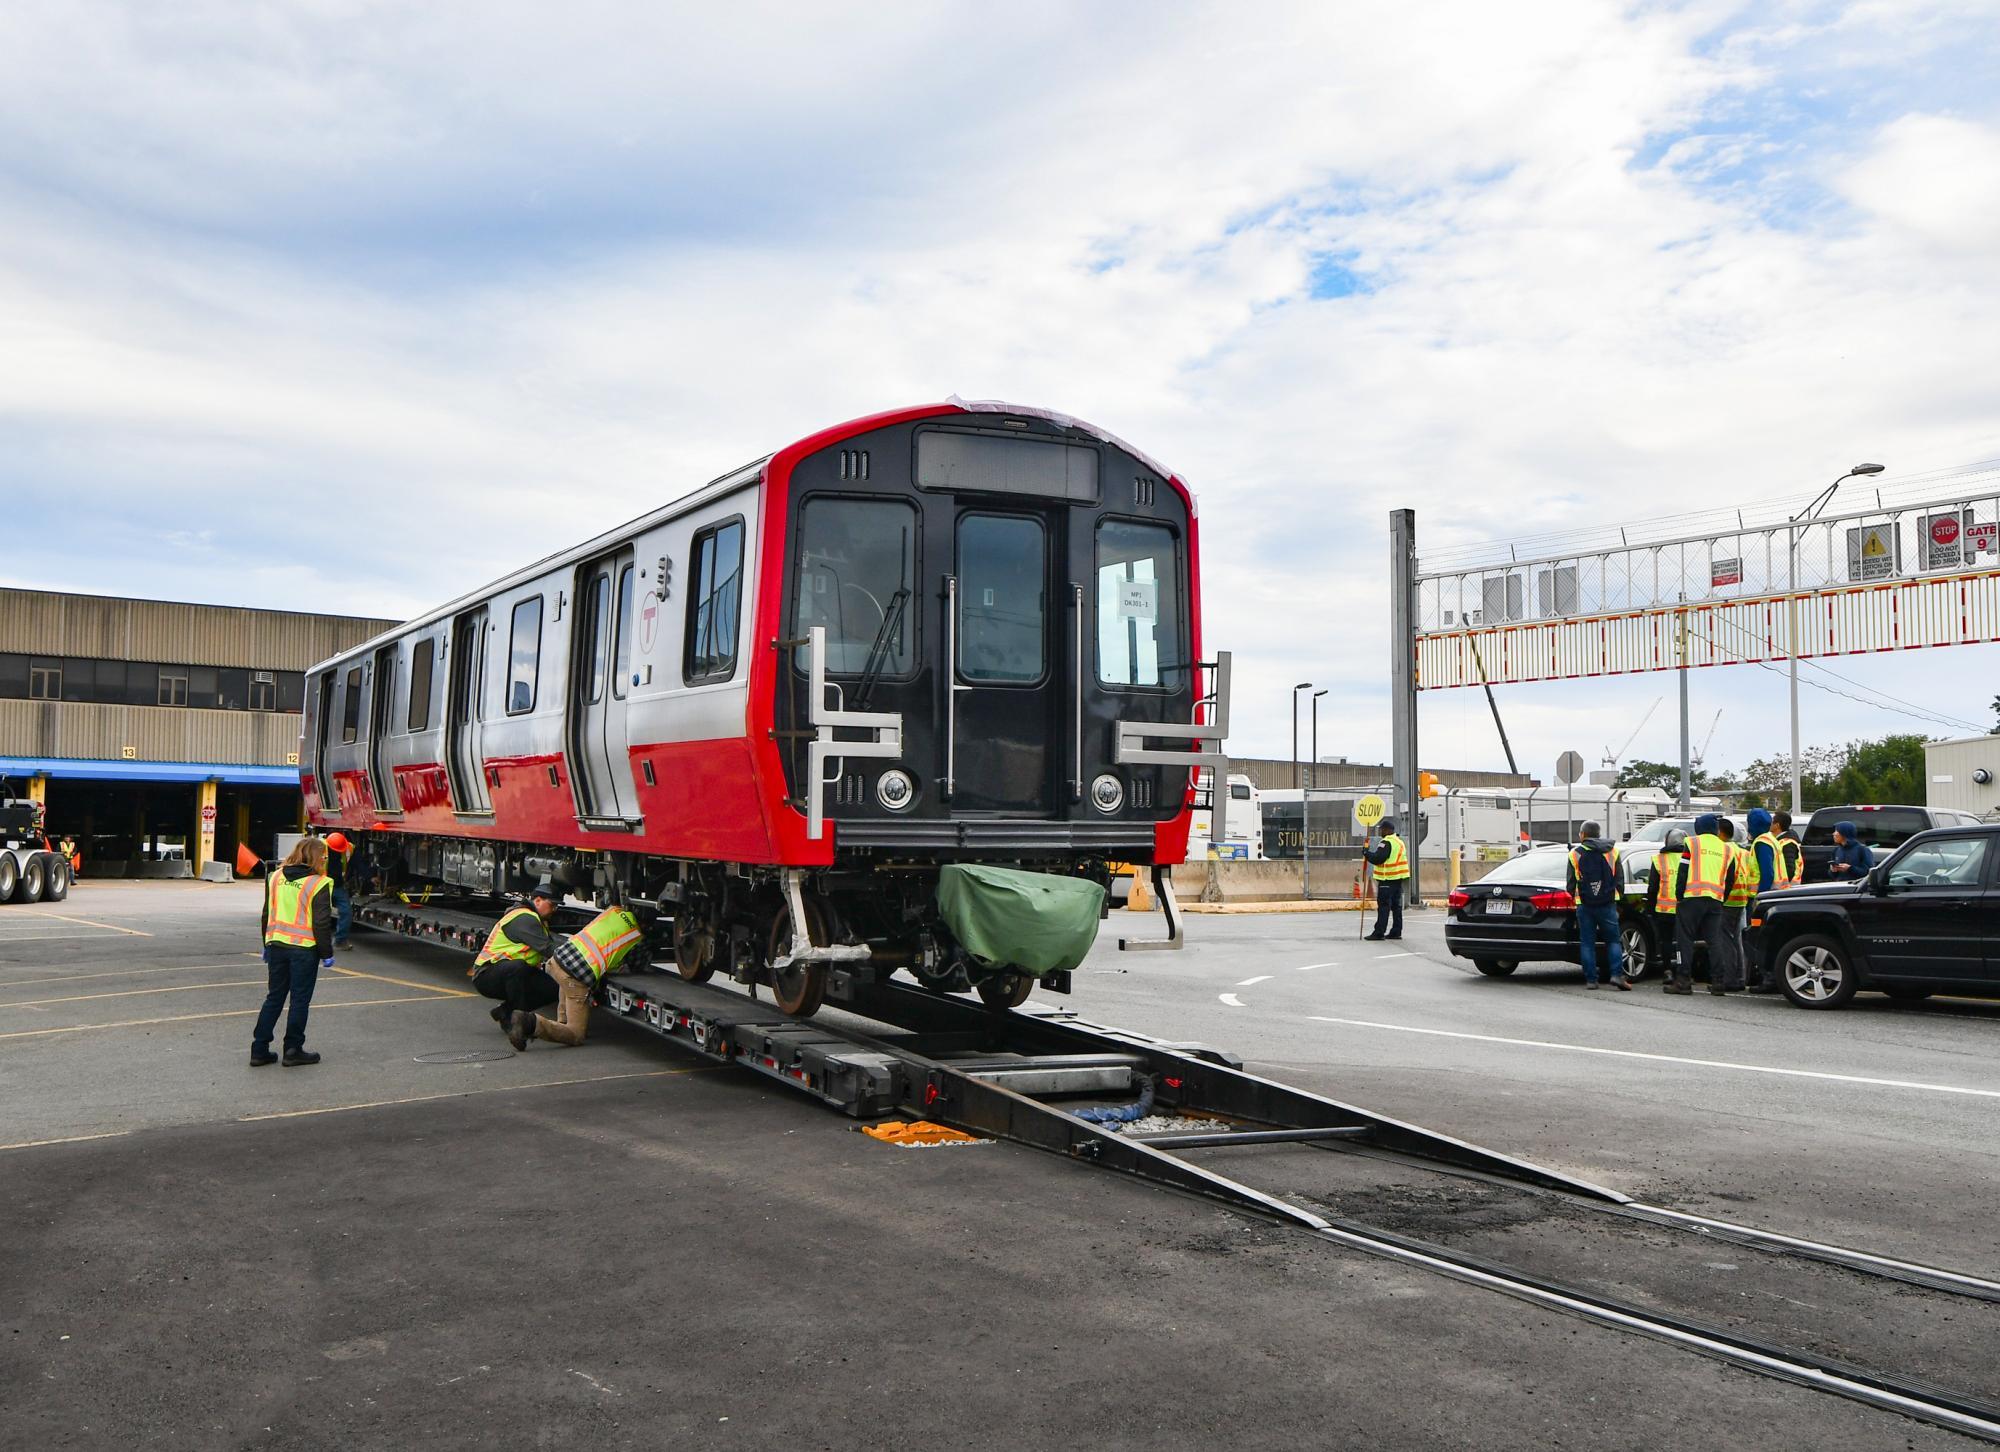 Red Line car being delievered to Cabot Yard, with MBTA workers helping to get it off the trailer.